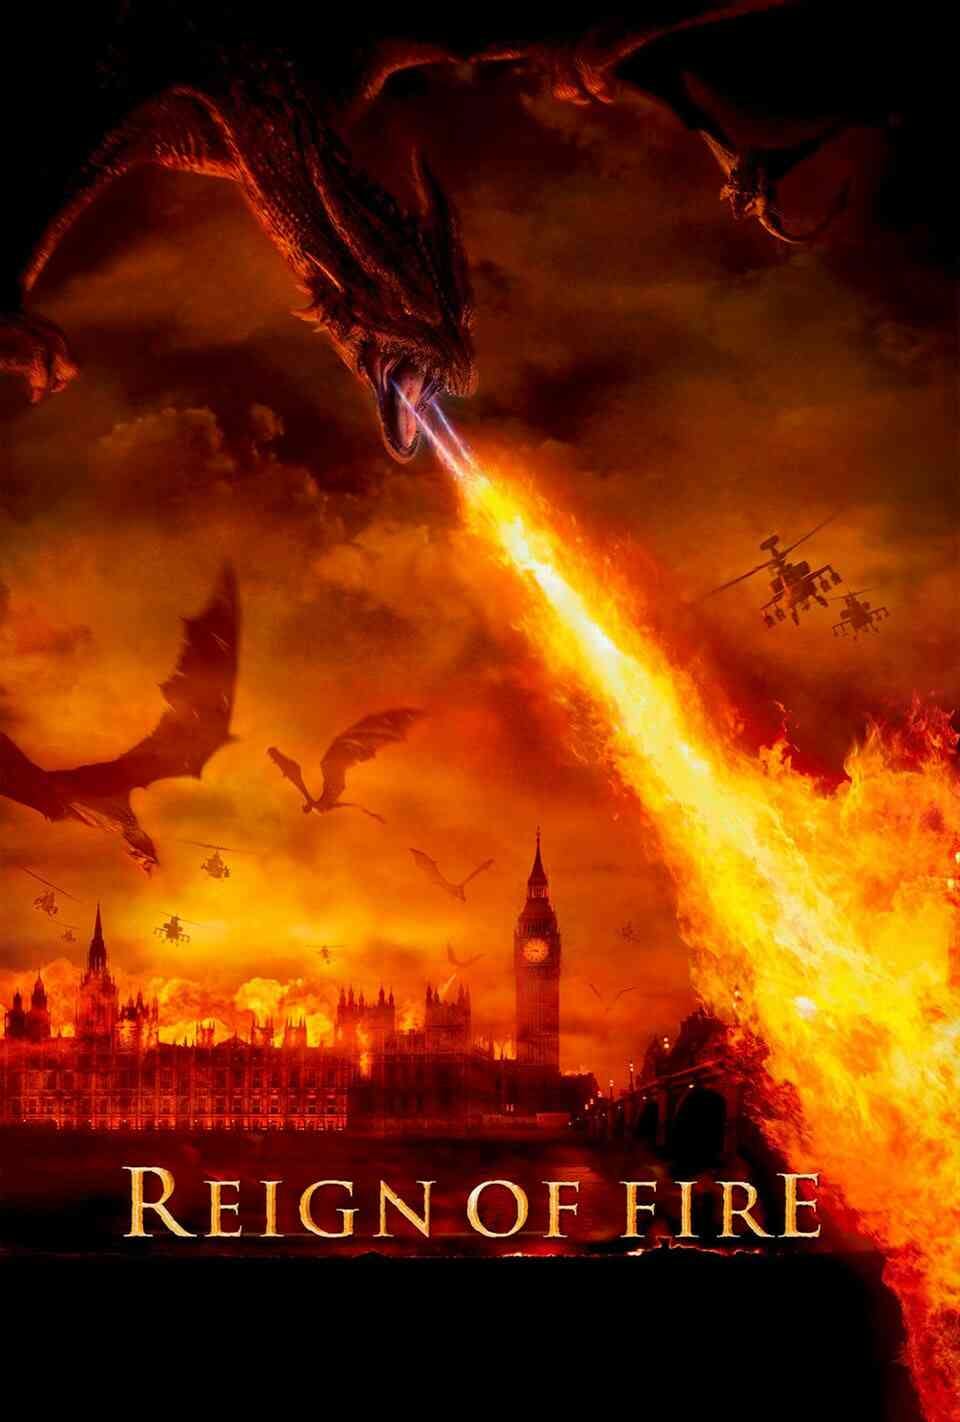 Read Reign of Fire screenplay.